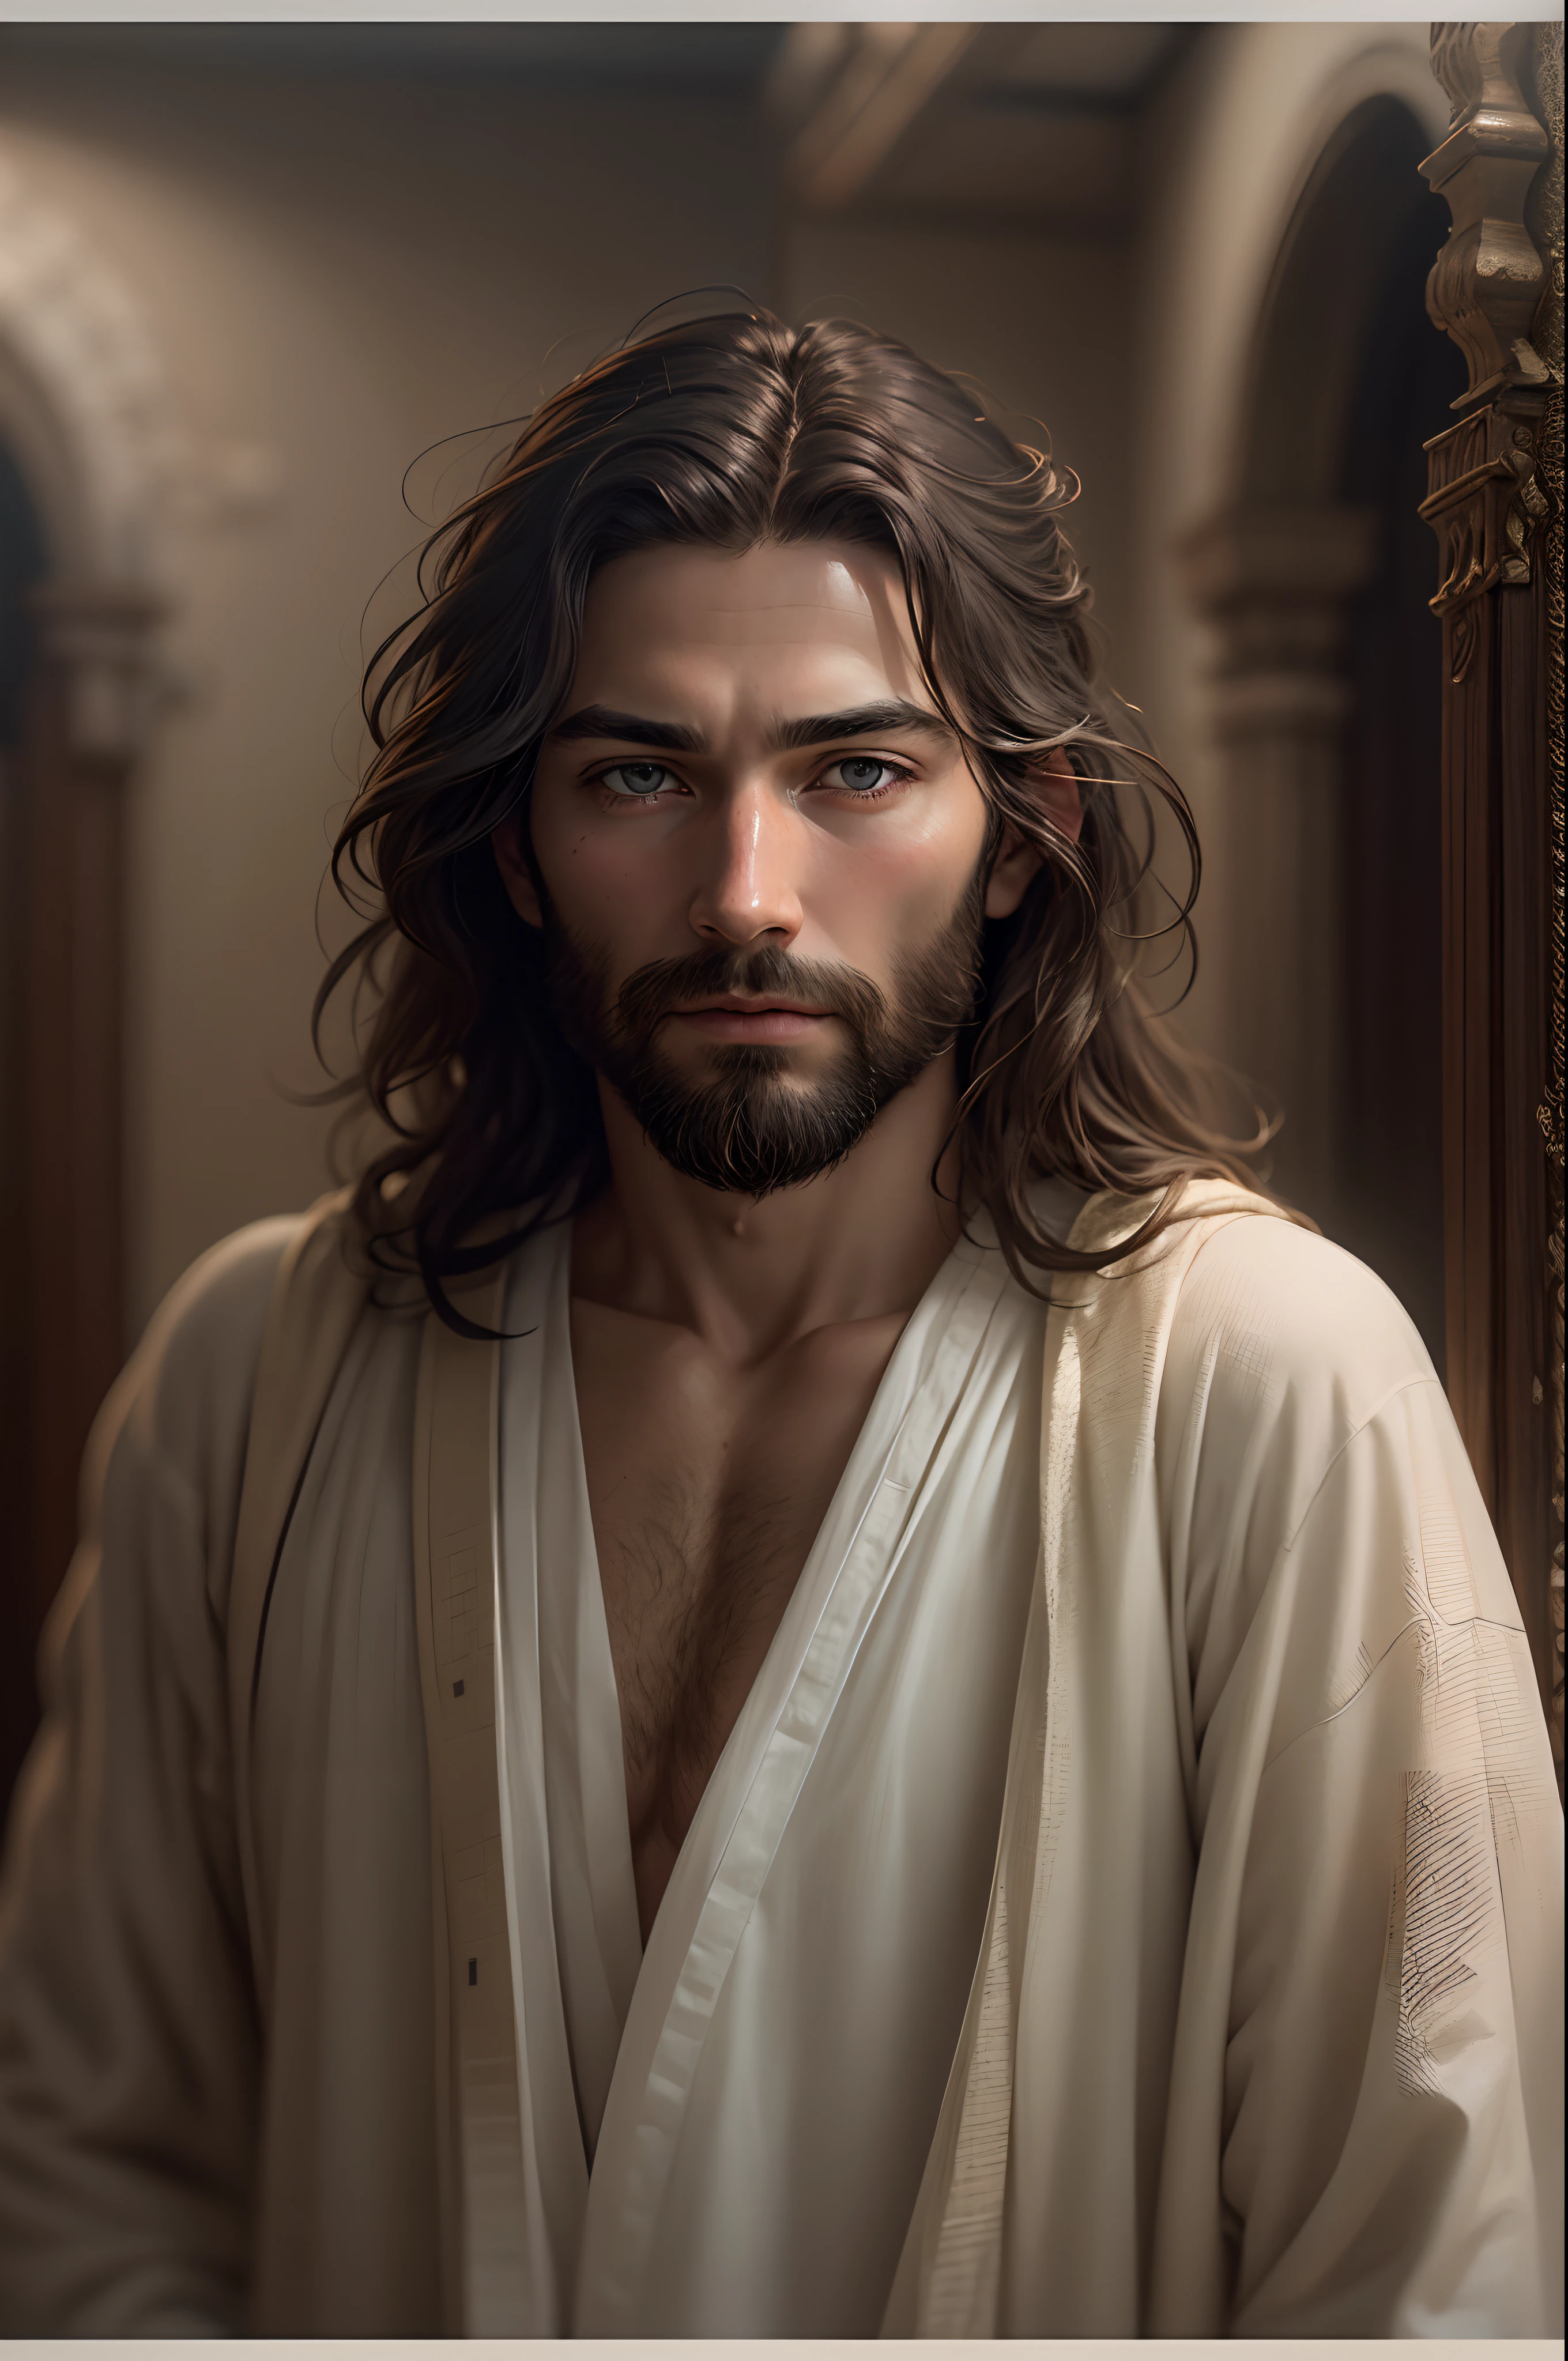 Raw Pictures of Jesus、Raw Pictures of Jesus Christ、
(symmetry)、central、((Close))Upportrait、(Jesus)、Raw photo of a very thin Caucasian man with long hair and beard、、Raw photo of a long white robe、35 mm、Natural Skin、clothes details、8K textures、8K、insane detail、intricate-detail、Ultra detailed very detailed、realisticlying、Soft Cinematic Lights、nffsw、foco nítido、((((Cinematic Look))))、Convoluted、elegent、extremely details CG、High-resolution RAW photos、High Dynamic Range RAW Photos、8K raw photos、8K resolution raw photos、 Unity 8k Wallpapers、Highly detailed CG、Raw photos of masterpieces、Realistic、Photorealistic、Three-dimensional、Beautiful and detailed、Depth、fine-textured、Fully Focused、realisticlying、